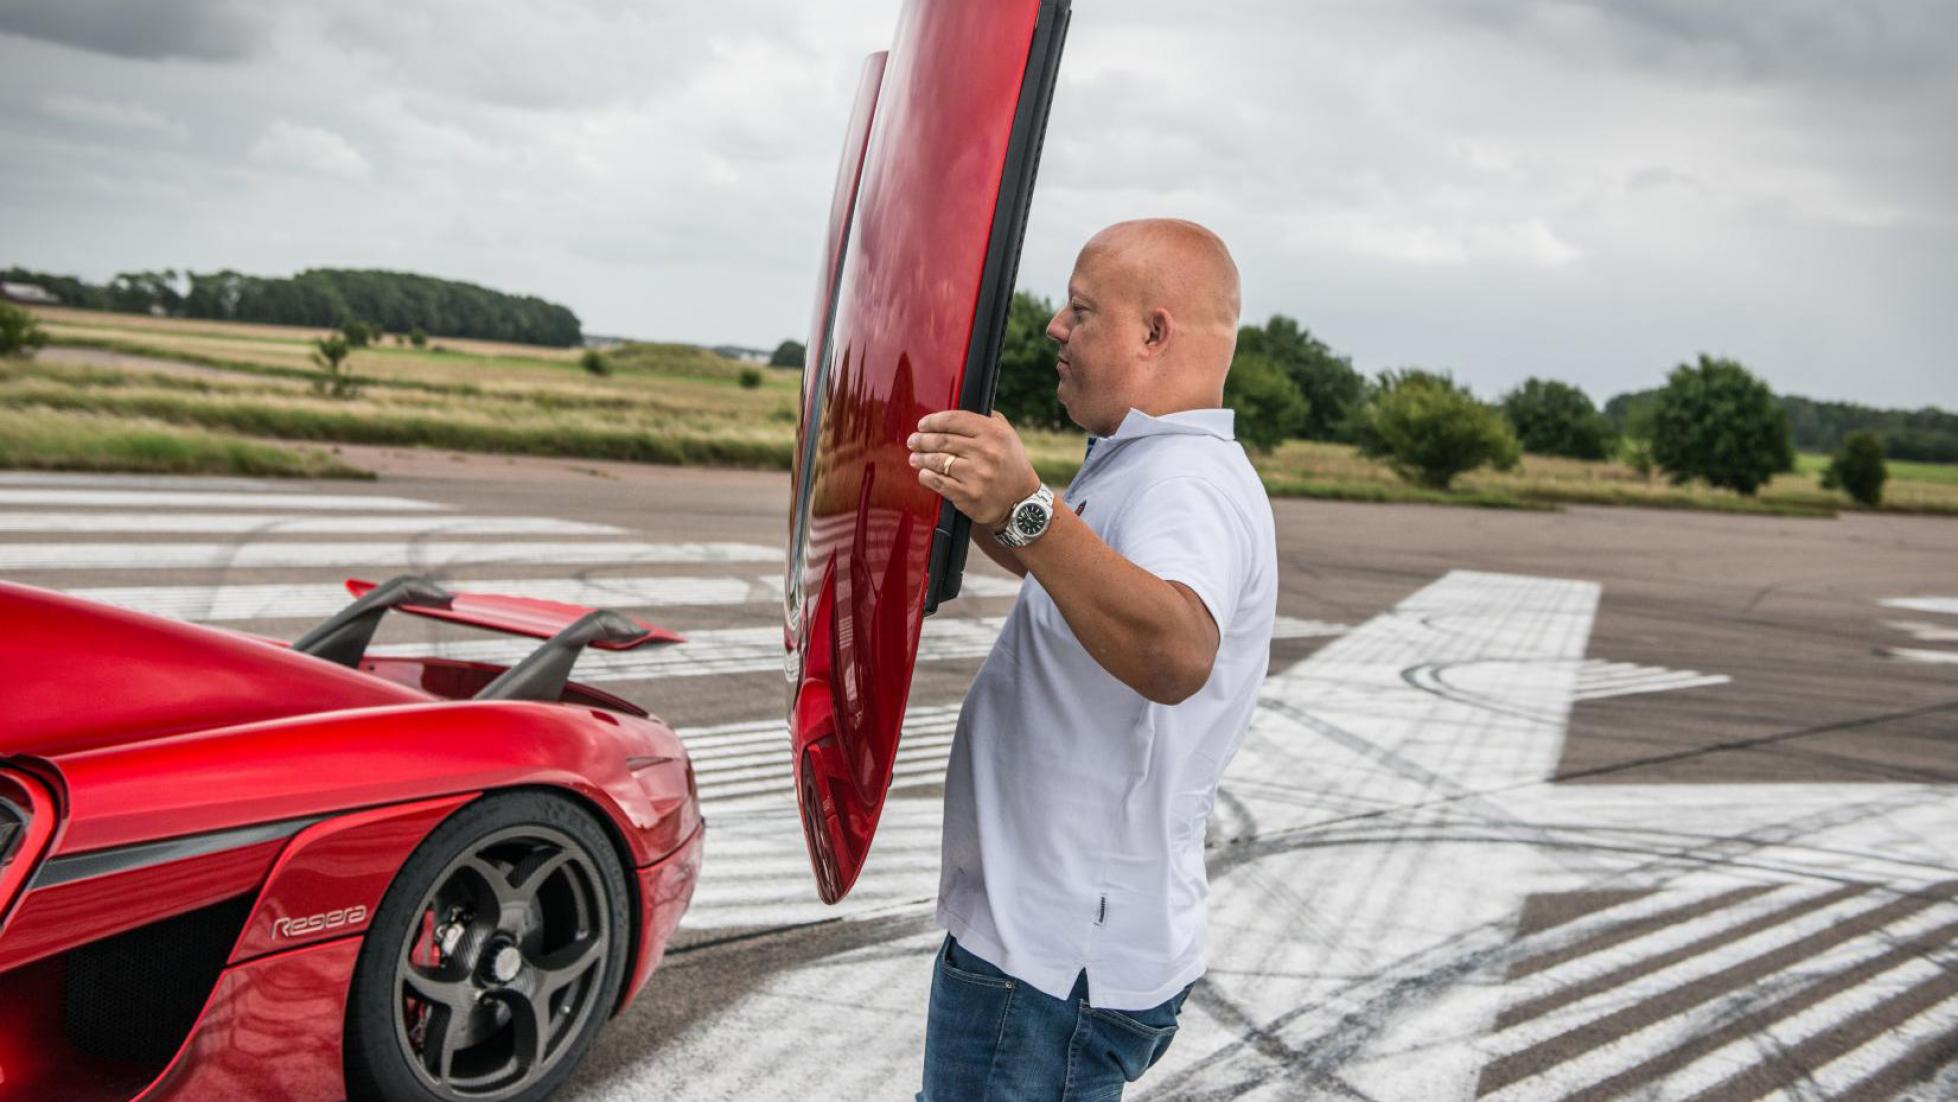 9. Koenigsegg’s roof-swallowing party piece